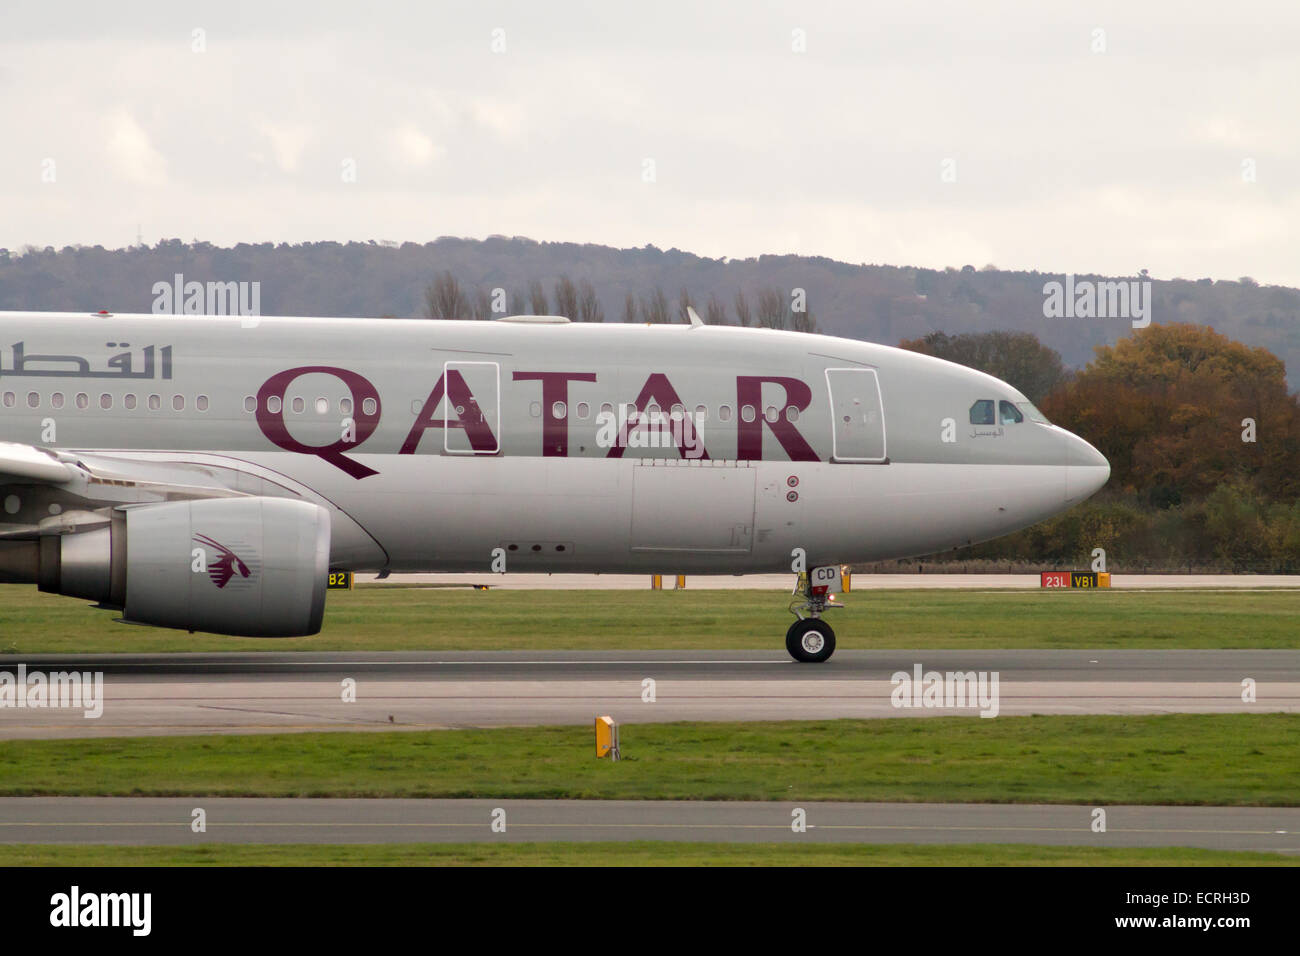 Qatar Airways Airbus A330, taxiing at Manchester International Airport. Stock Photo